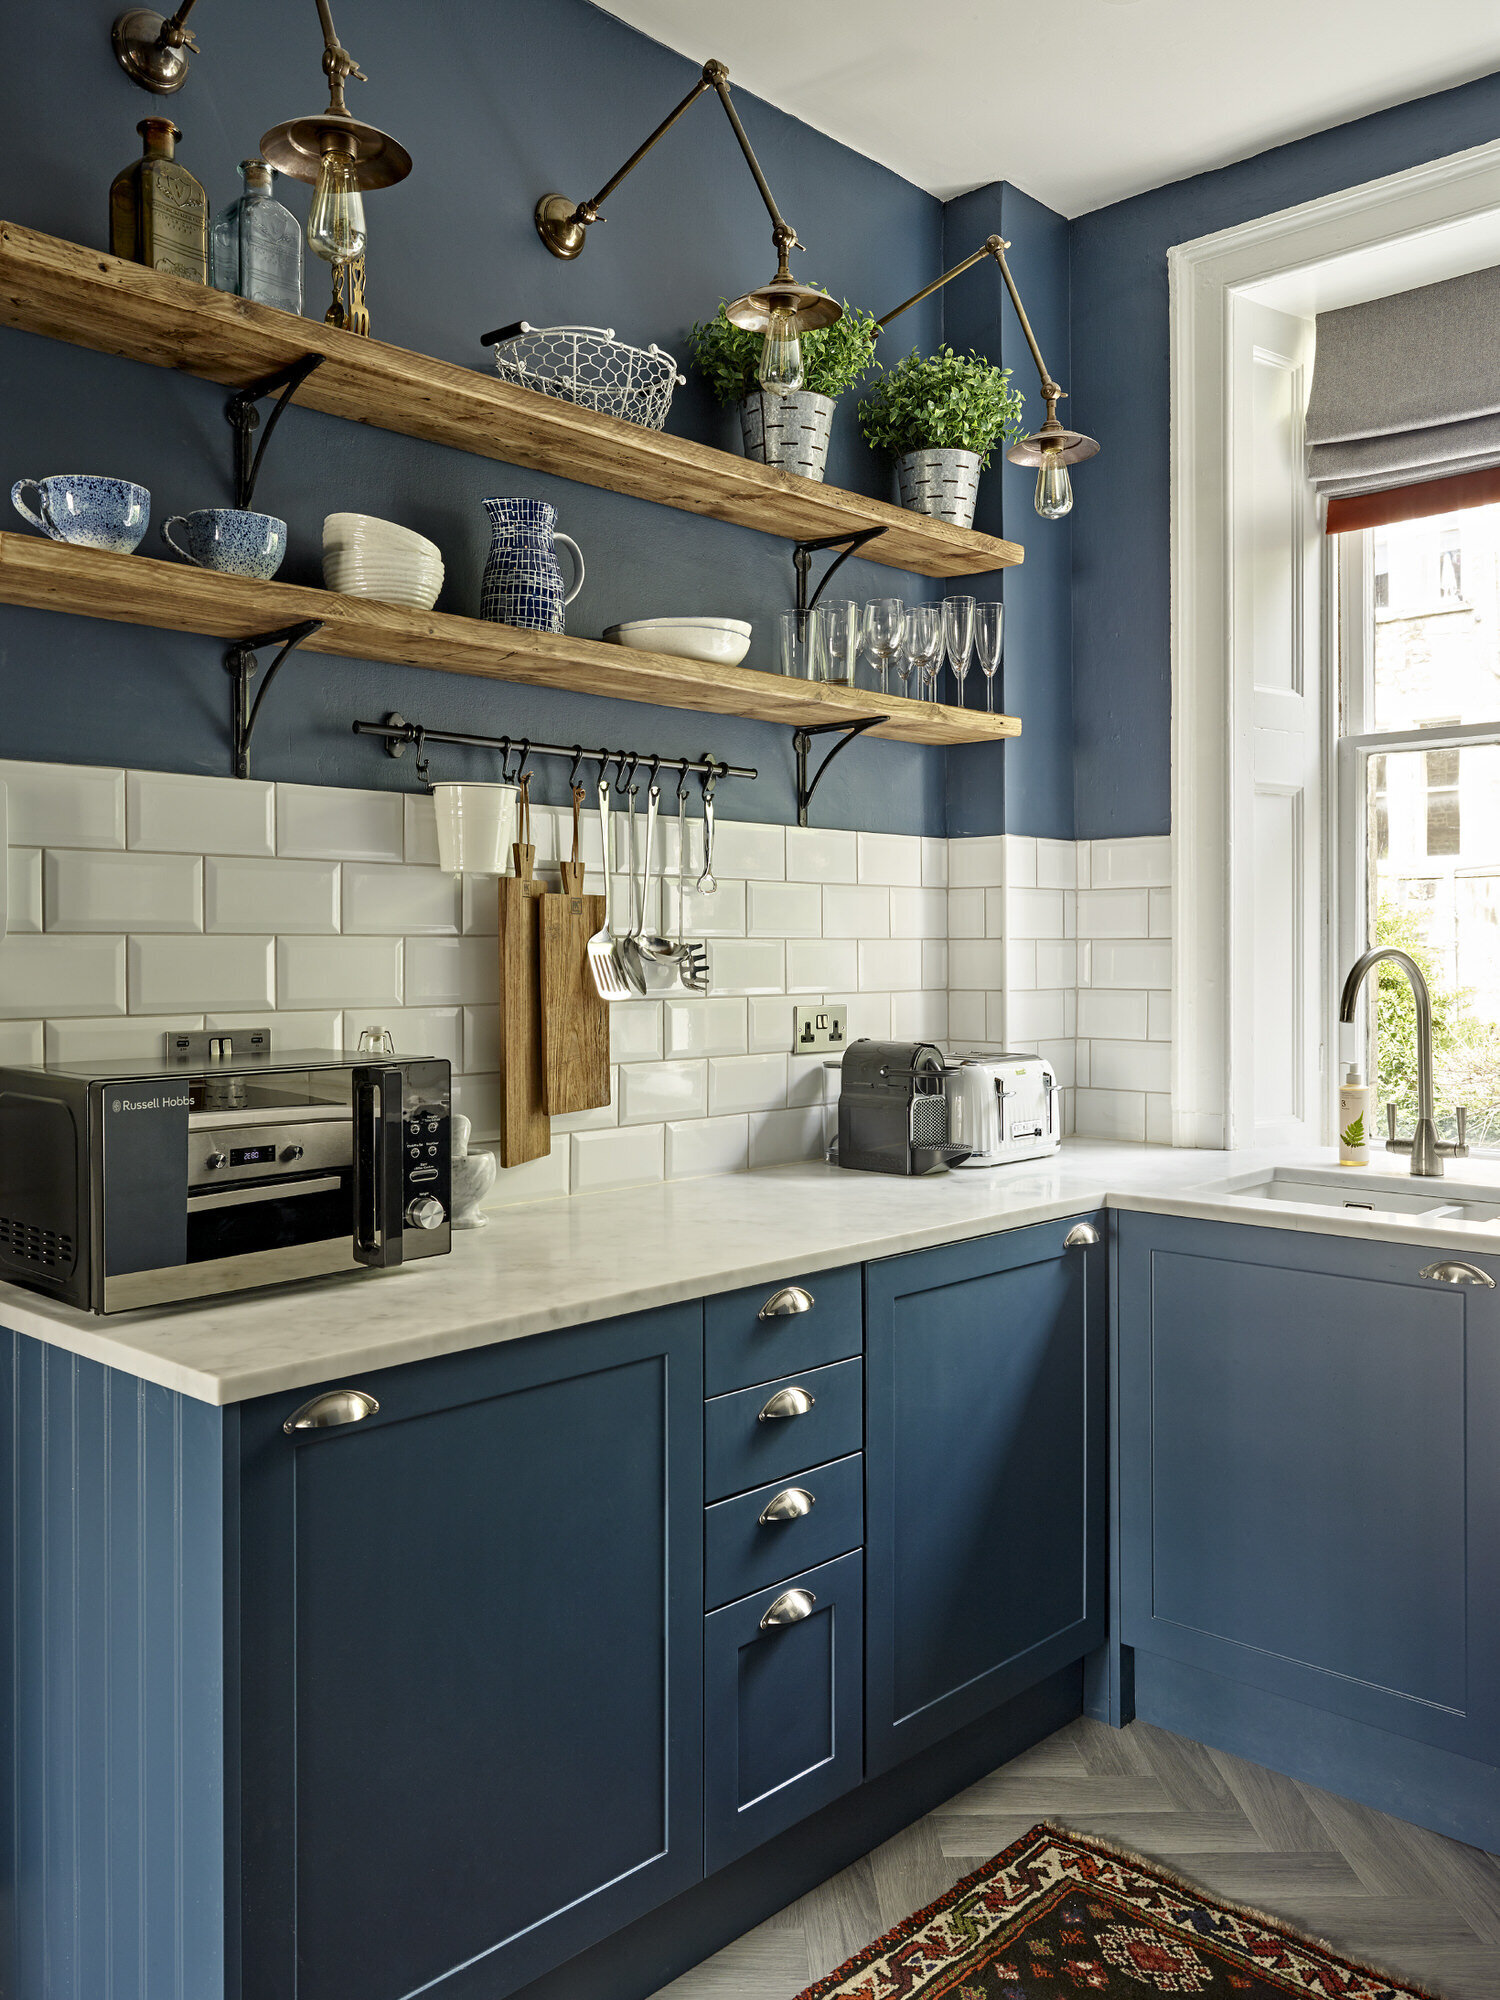 Navy and white interior kitchen flat with open shelving